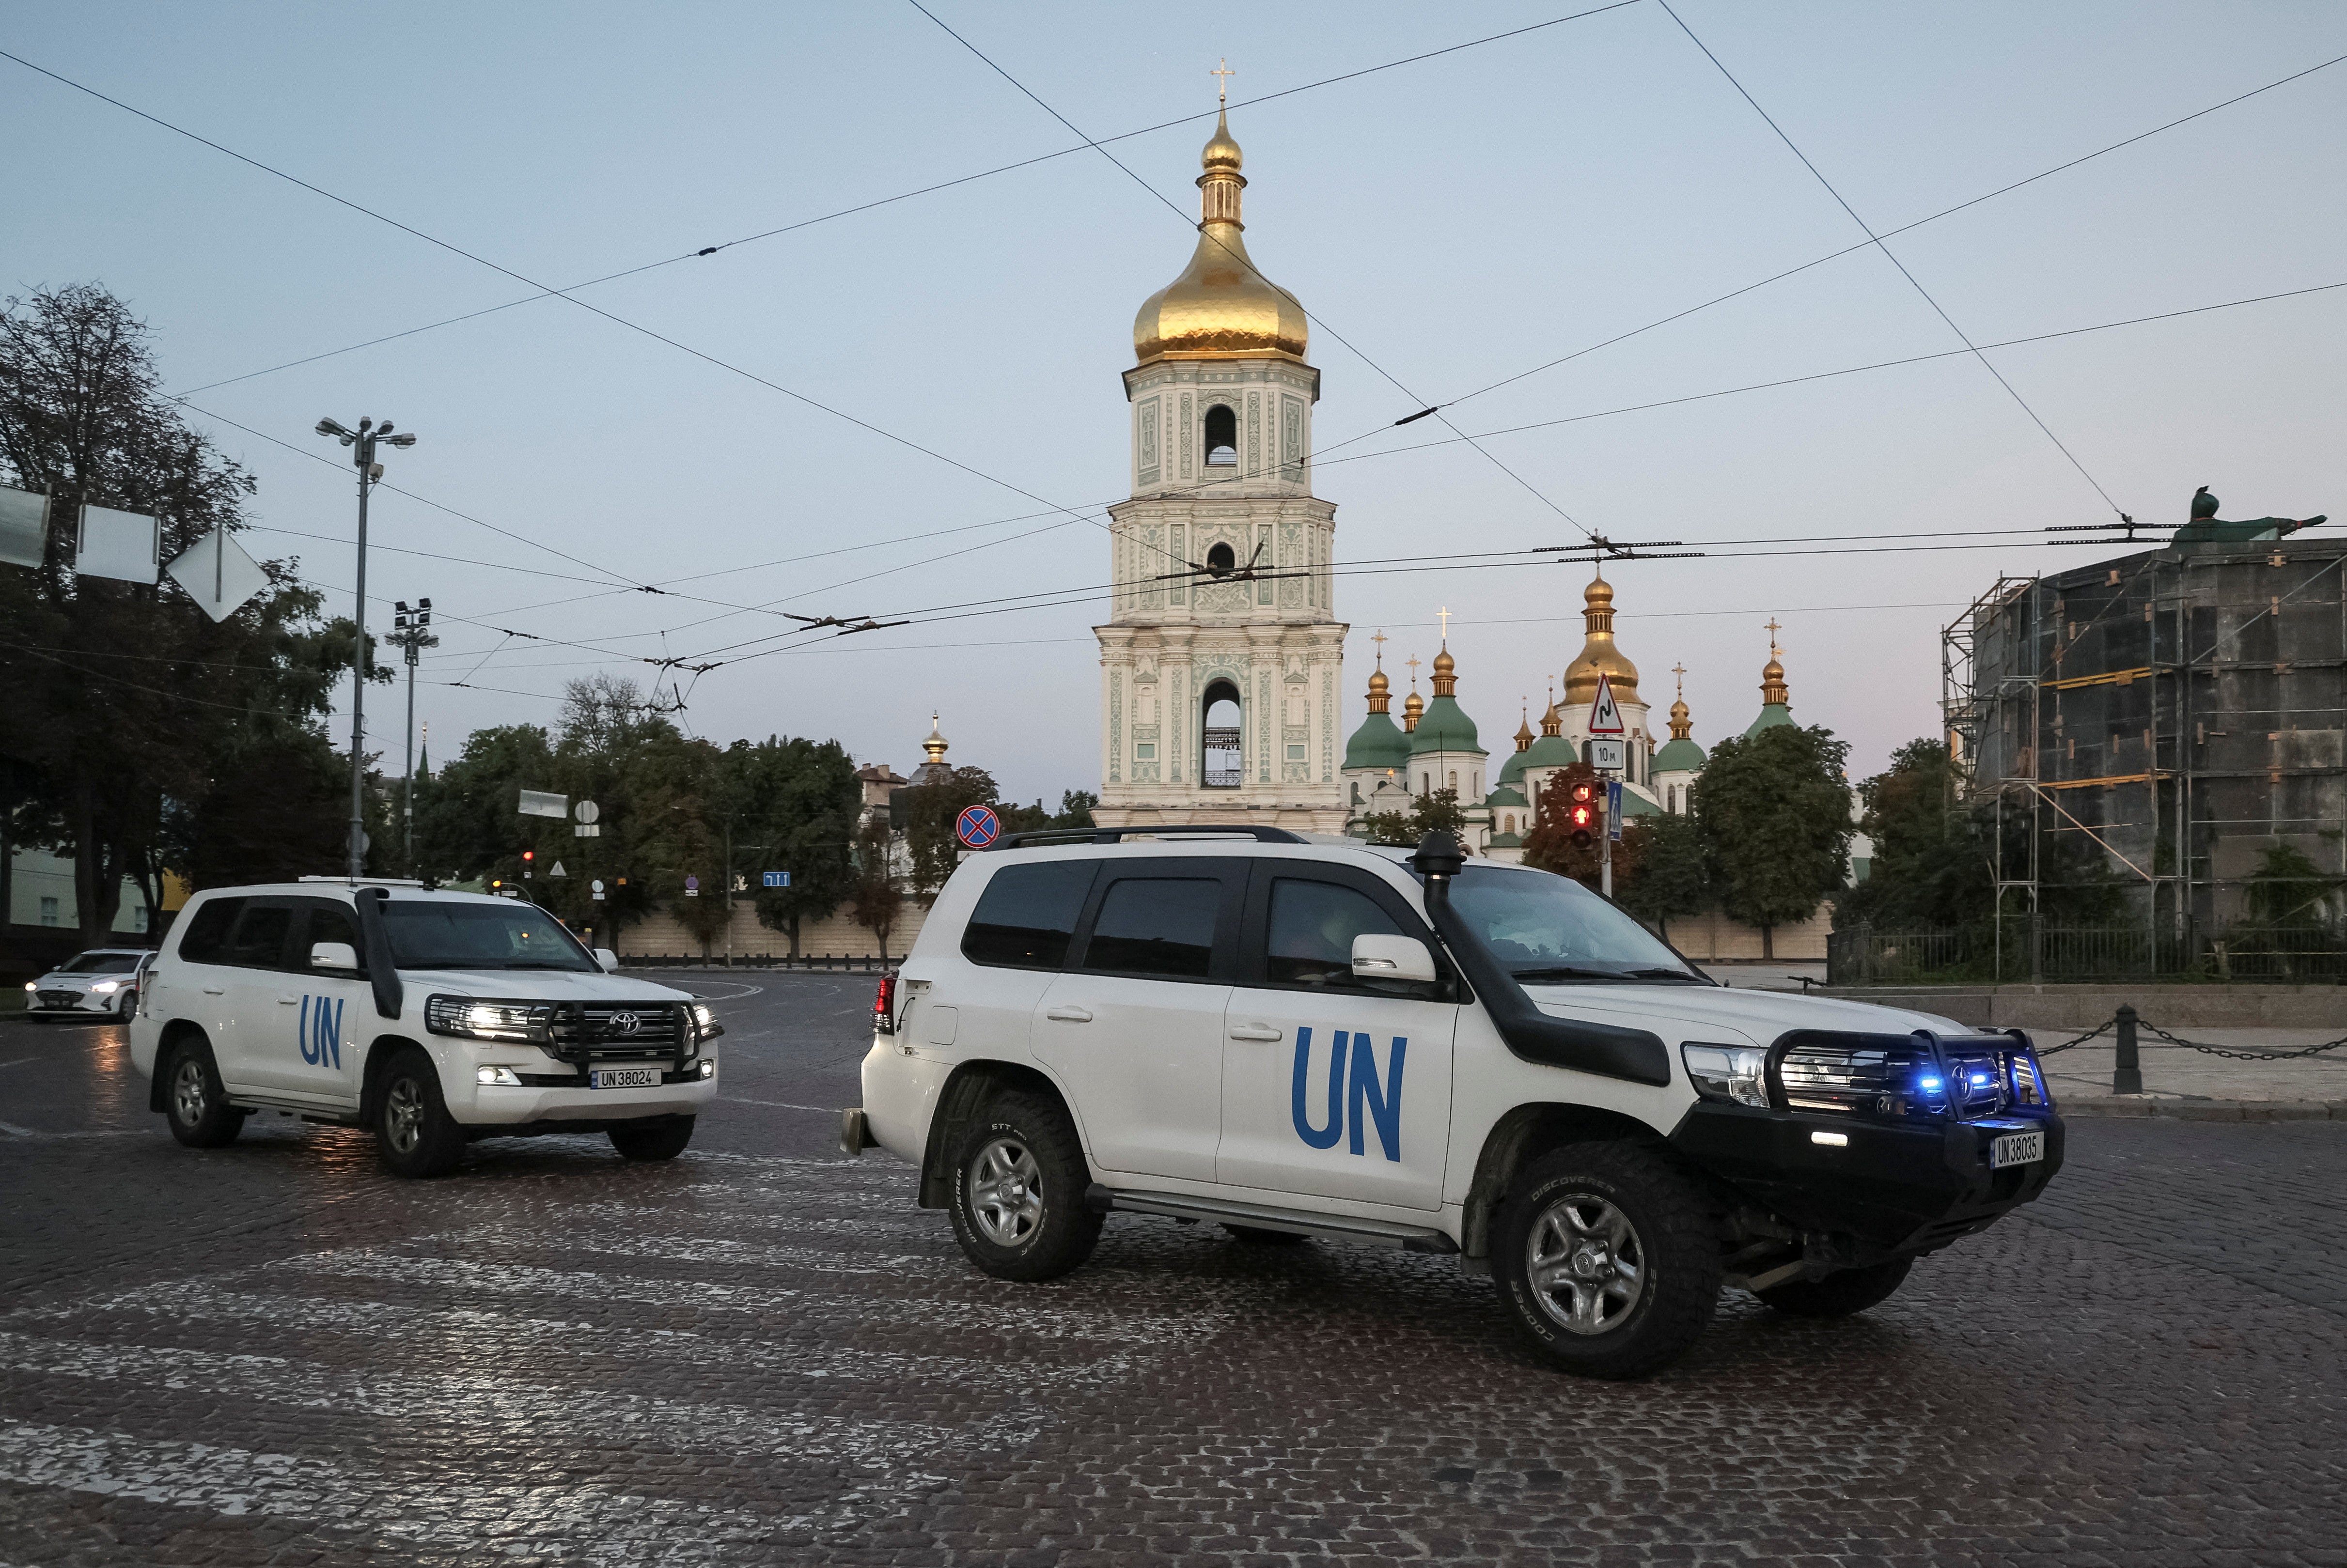 UN vehicles carry IAEA nuclear inspectors from Kyiv to Zaporizhzhia on Wednesday